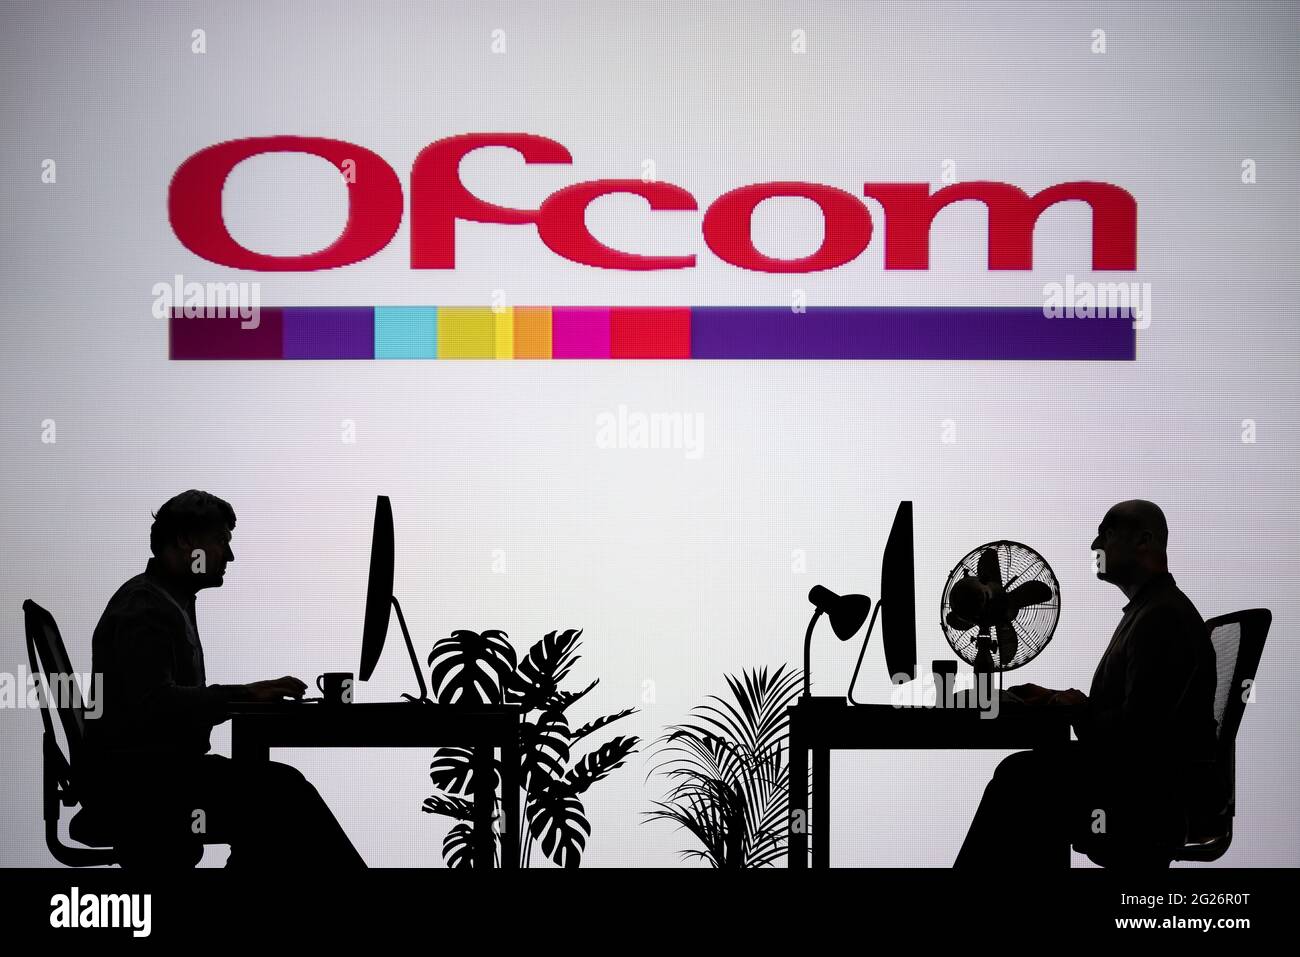 The Ofcom logo is seen on an LED screen in the background while two silhouetted people work in an office environment (Editorial use only) Stock Photo